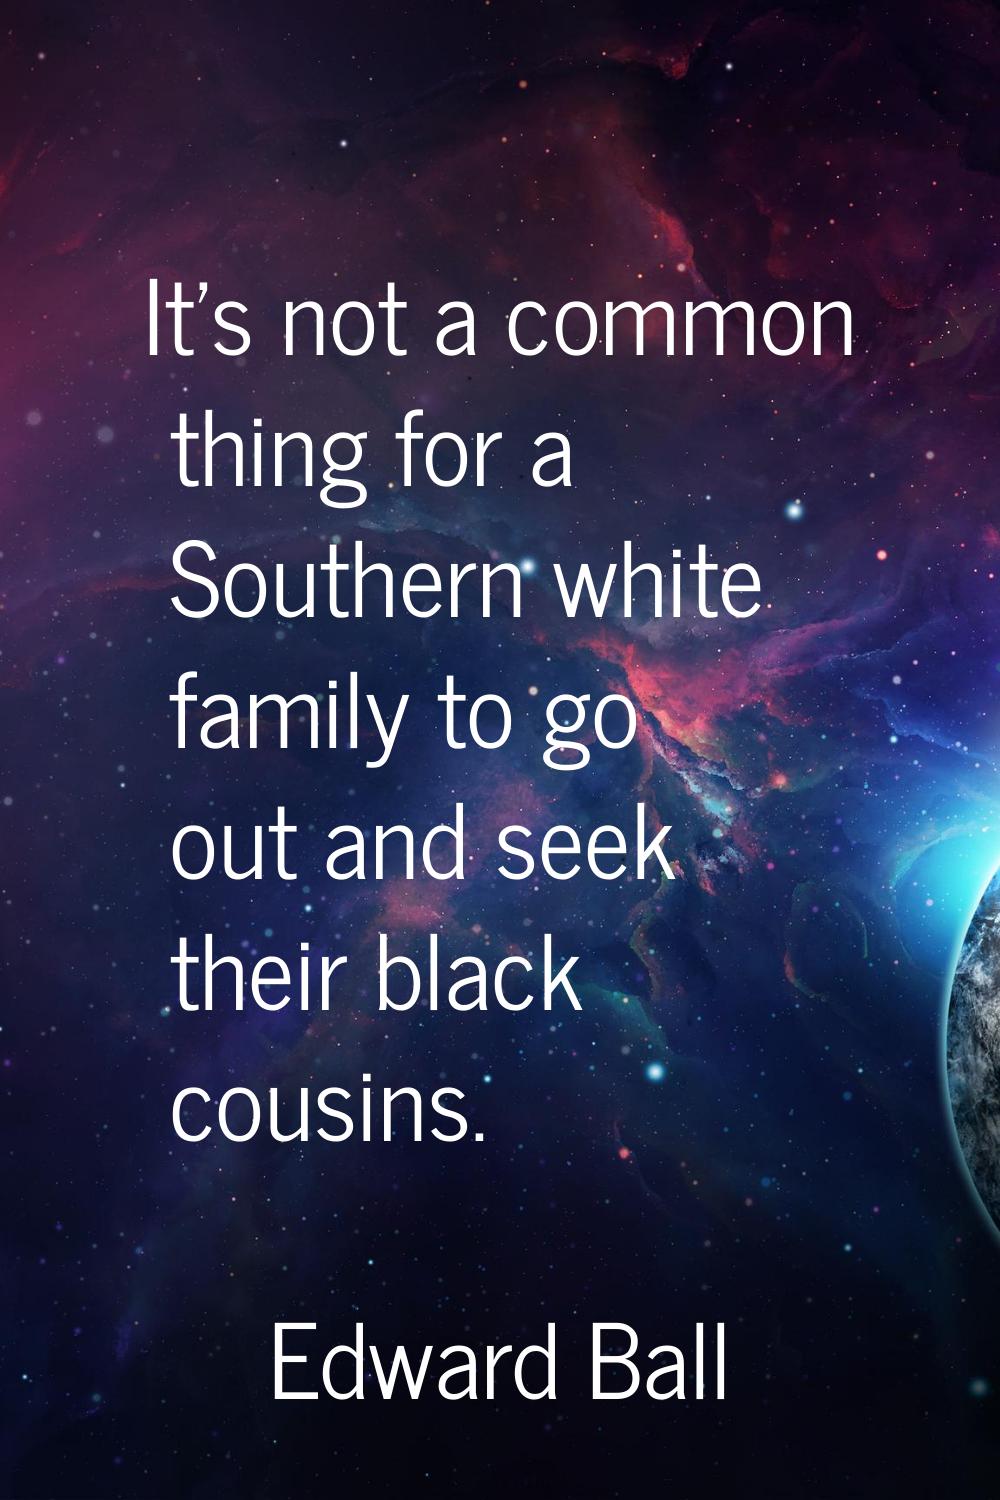 It's not a common thing for a Southern white family to go out and seek their black cousins.